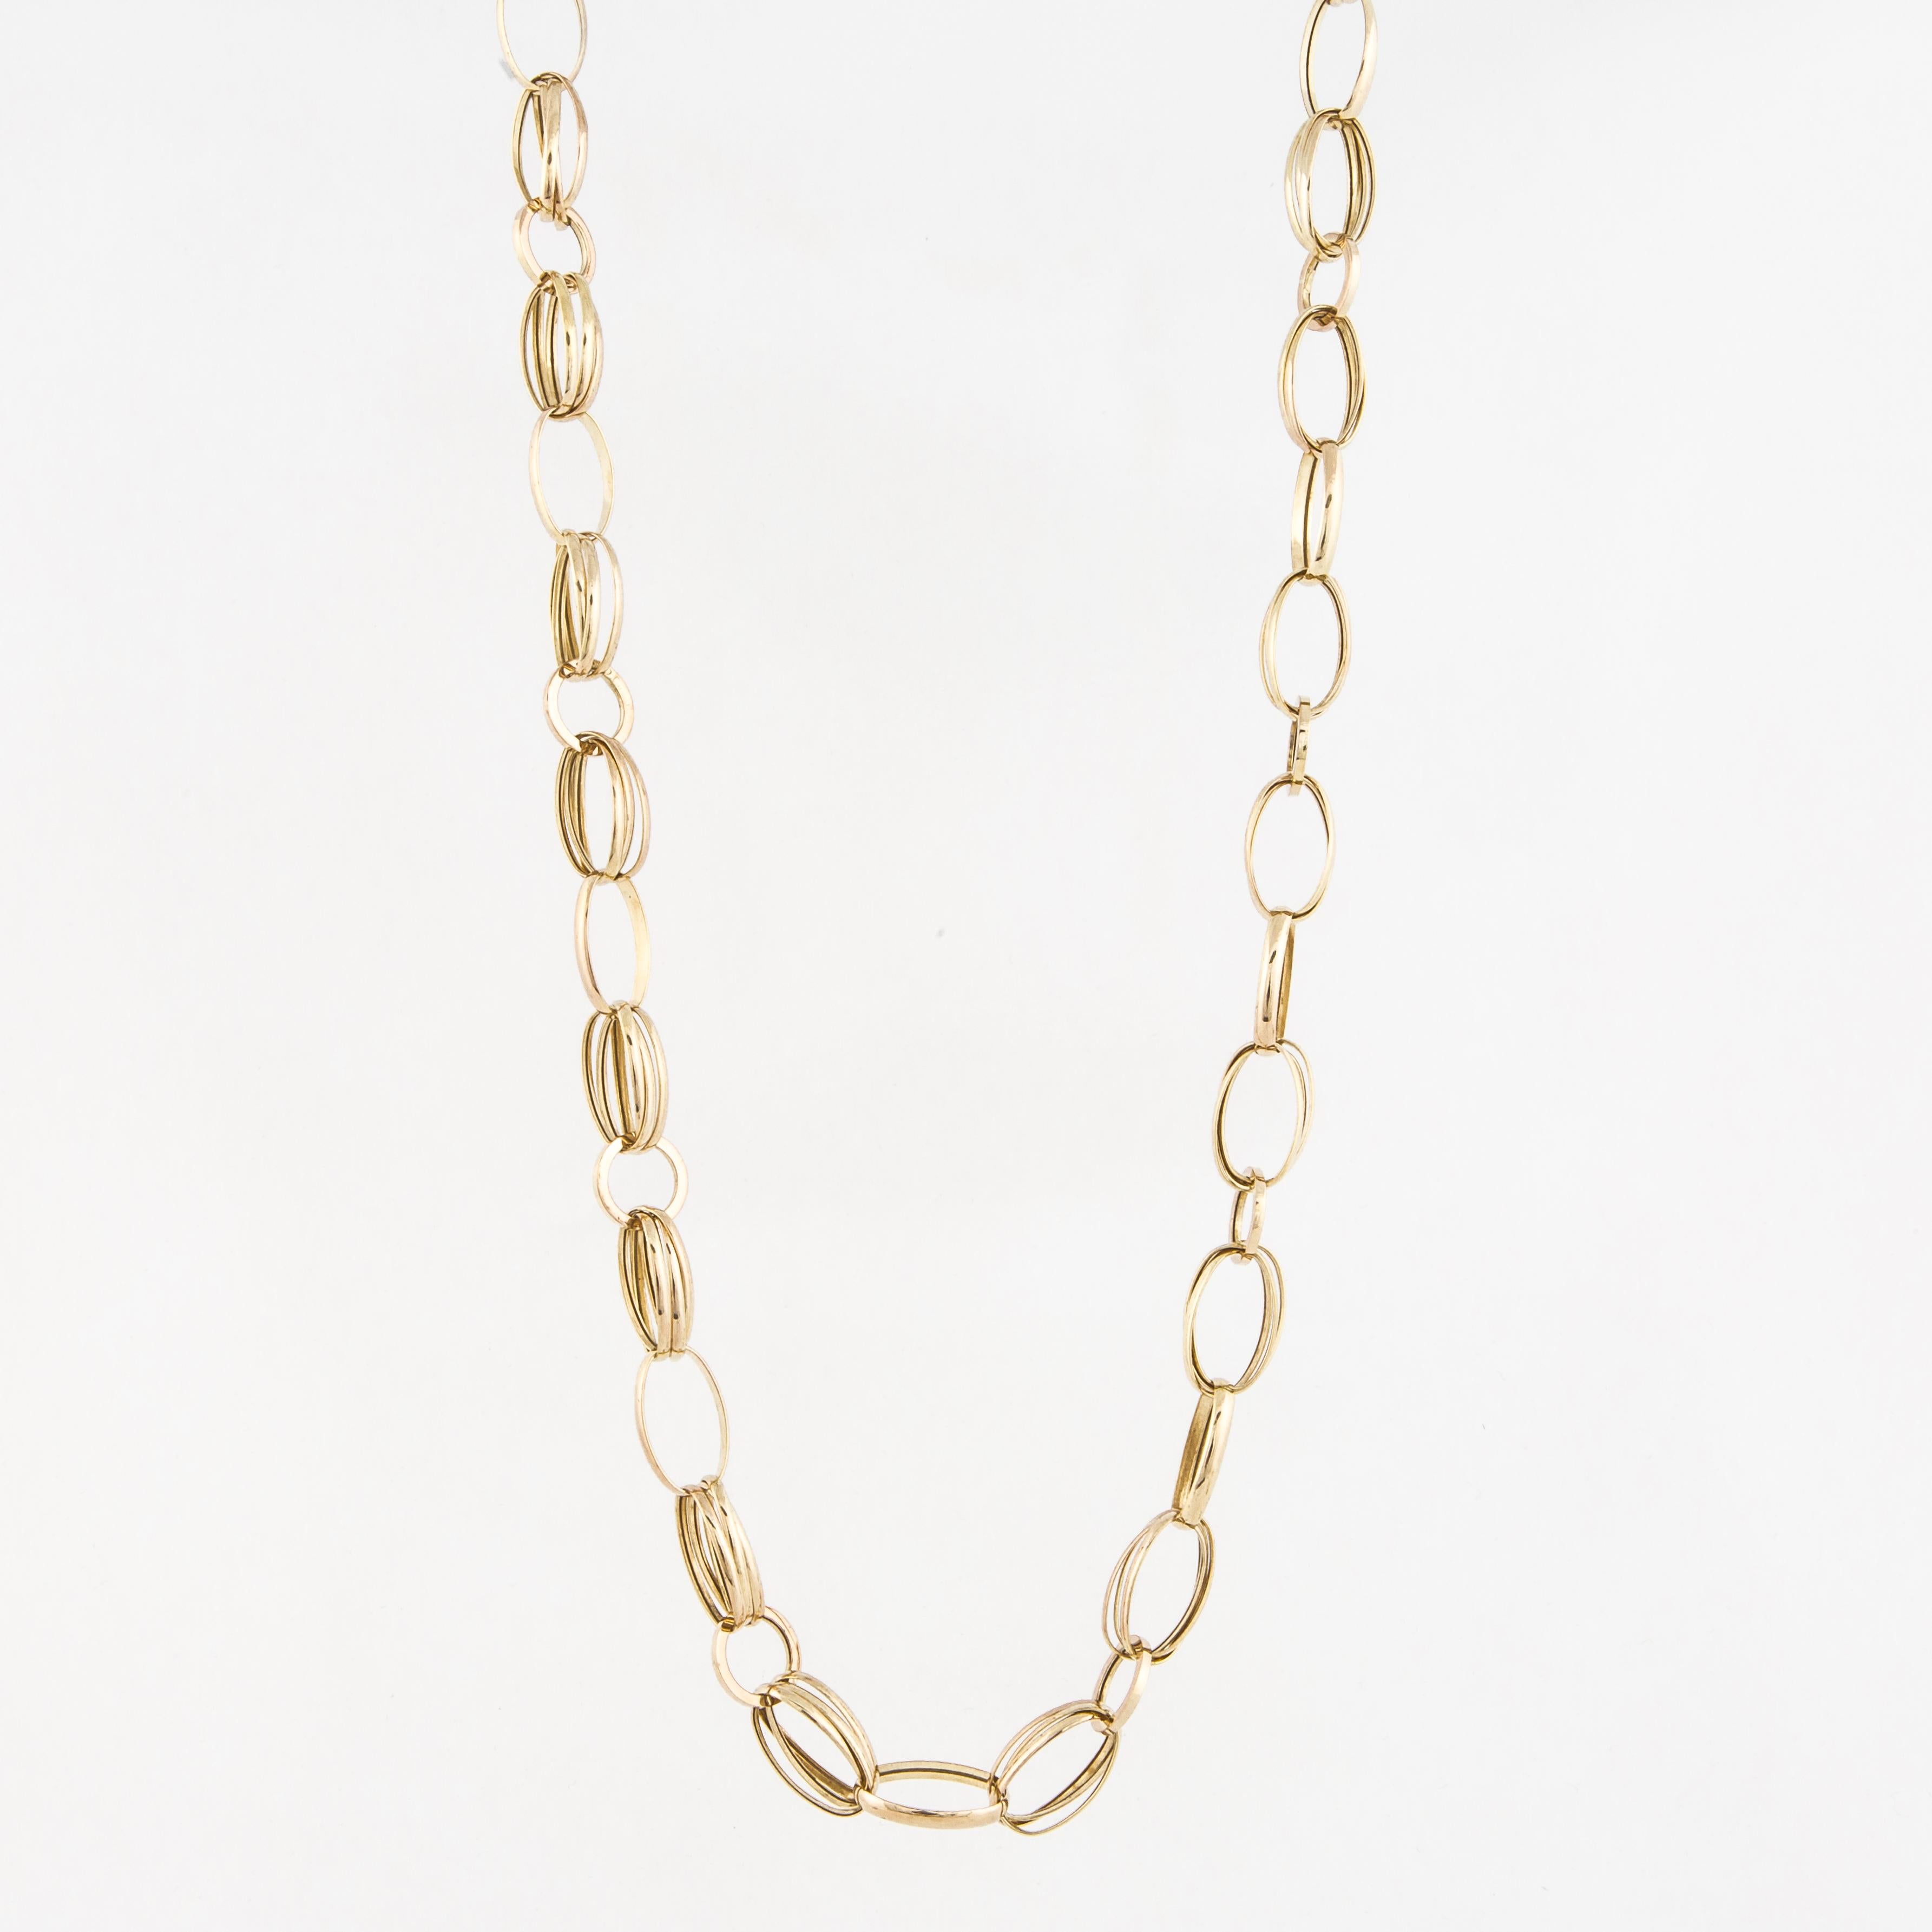 14K yellow gold necklace with oval and round links.  The necklace measures 28 inches long and 7/16 inches wide.